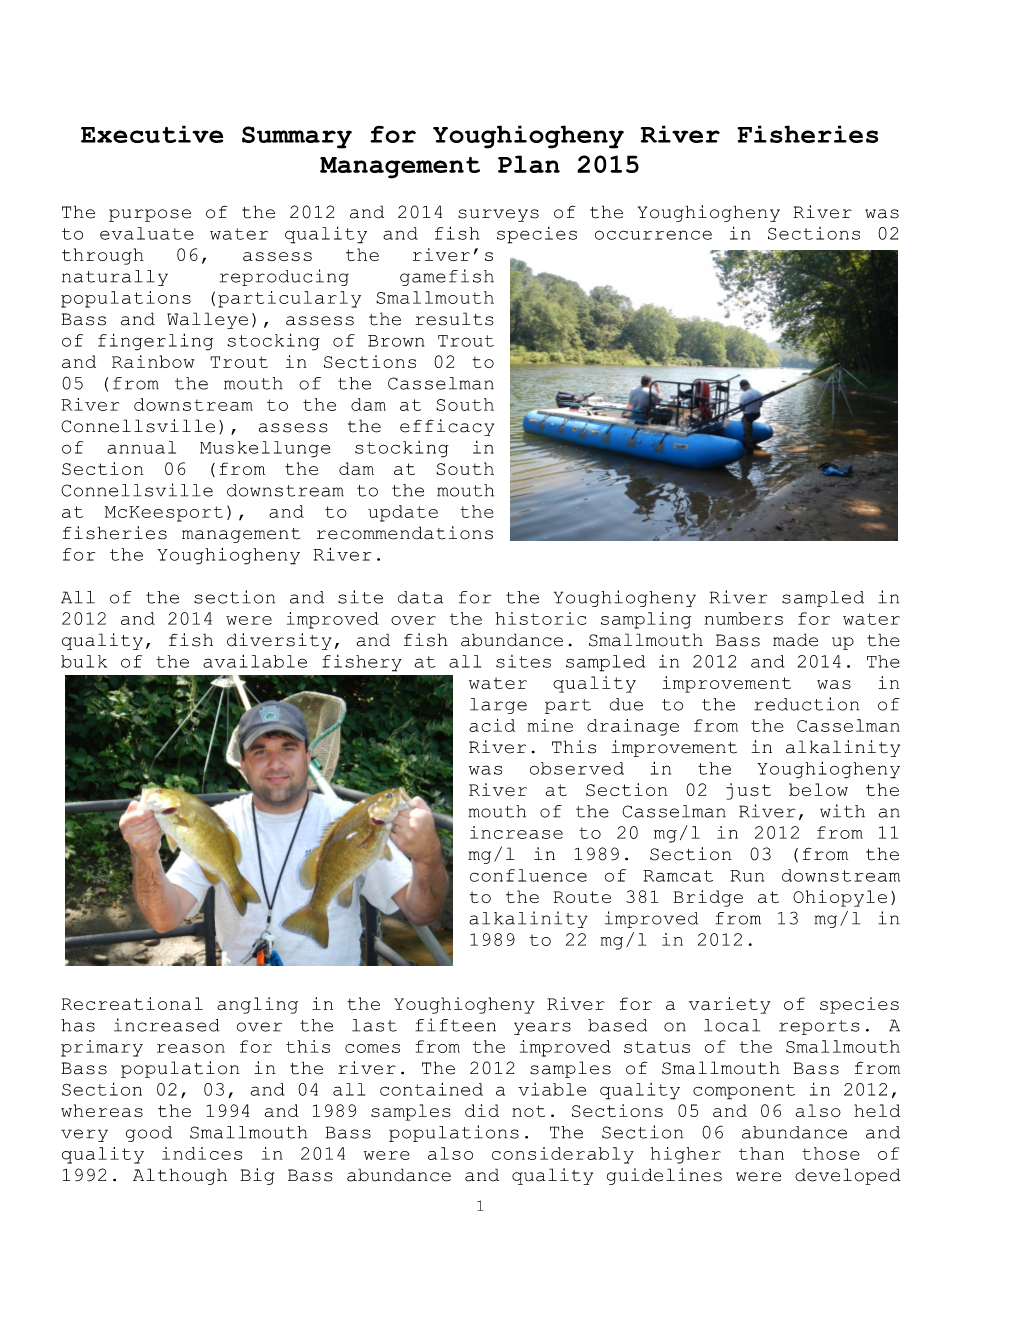 Executive Summary for Youghiogheny River Fisheries Management Plan 2015